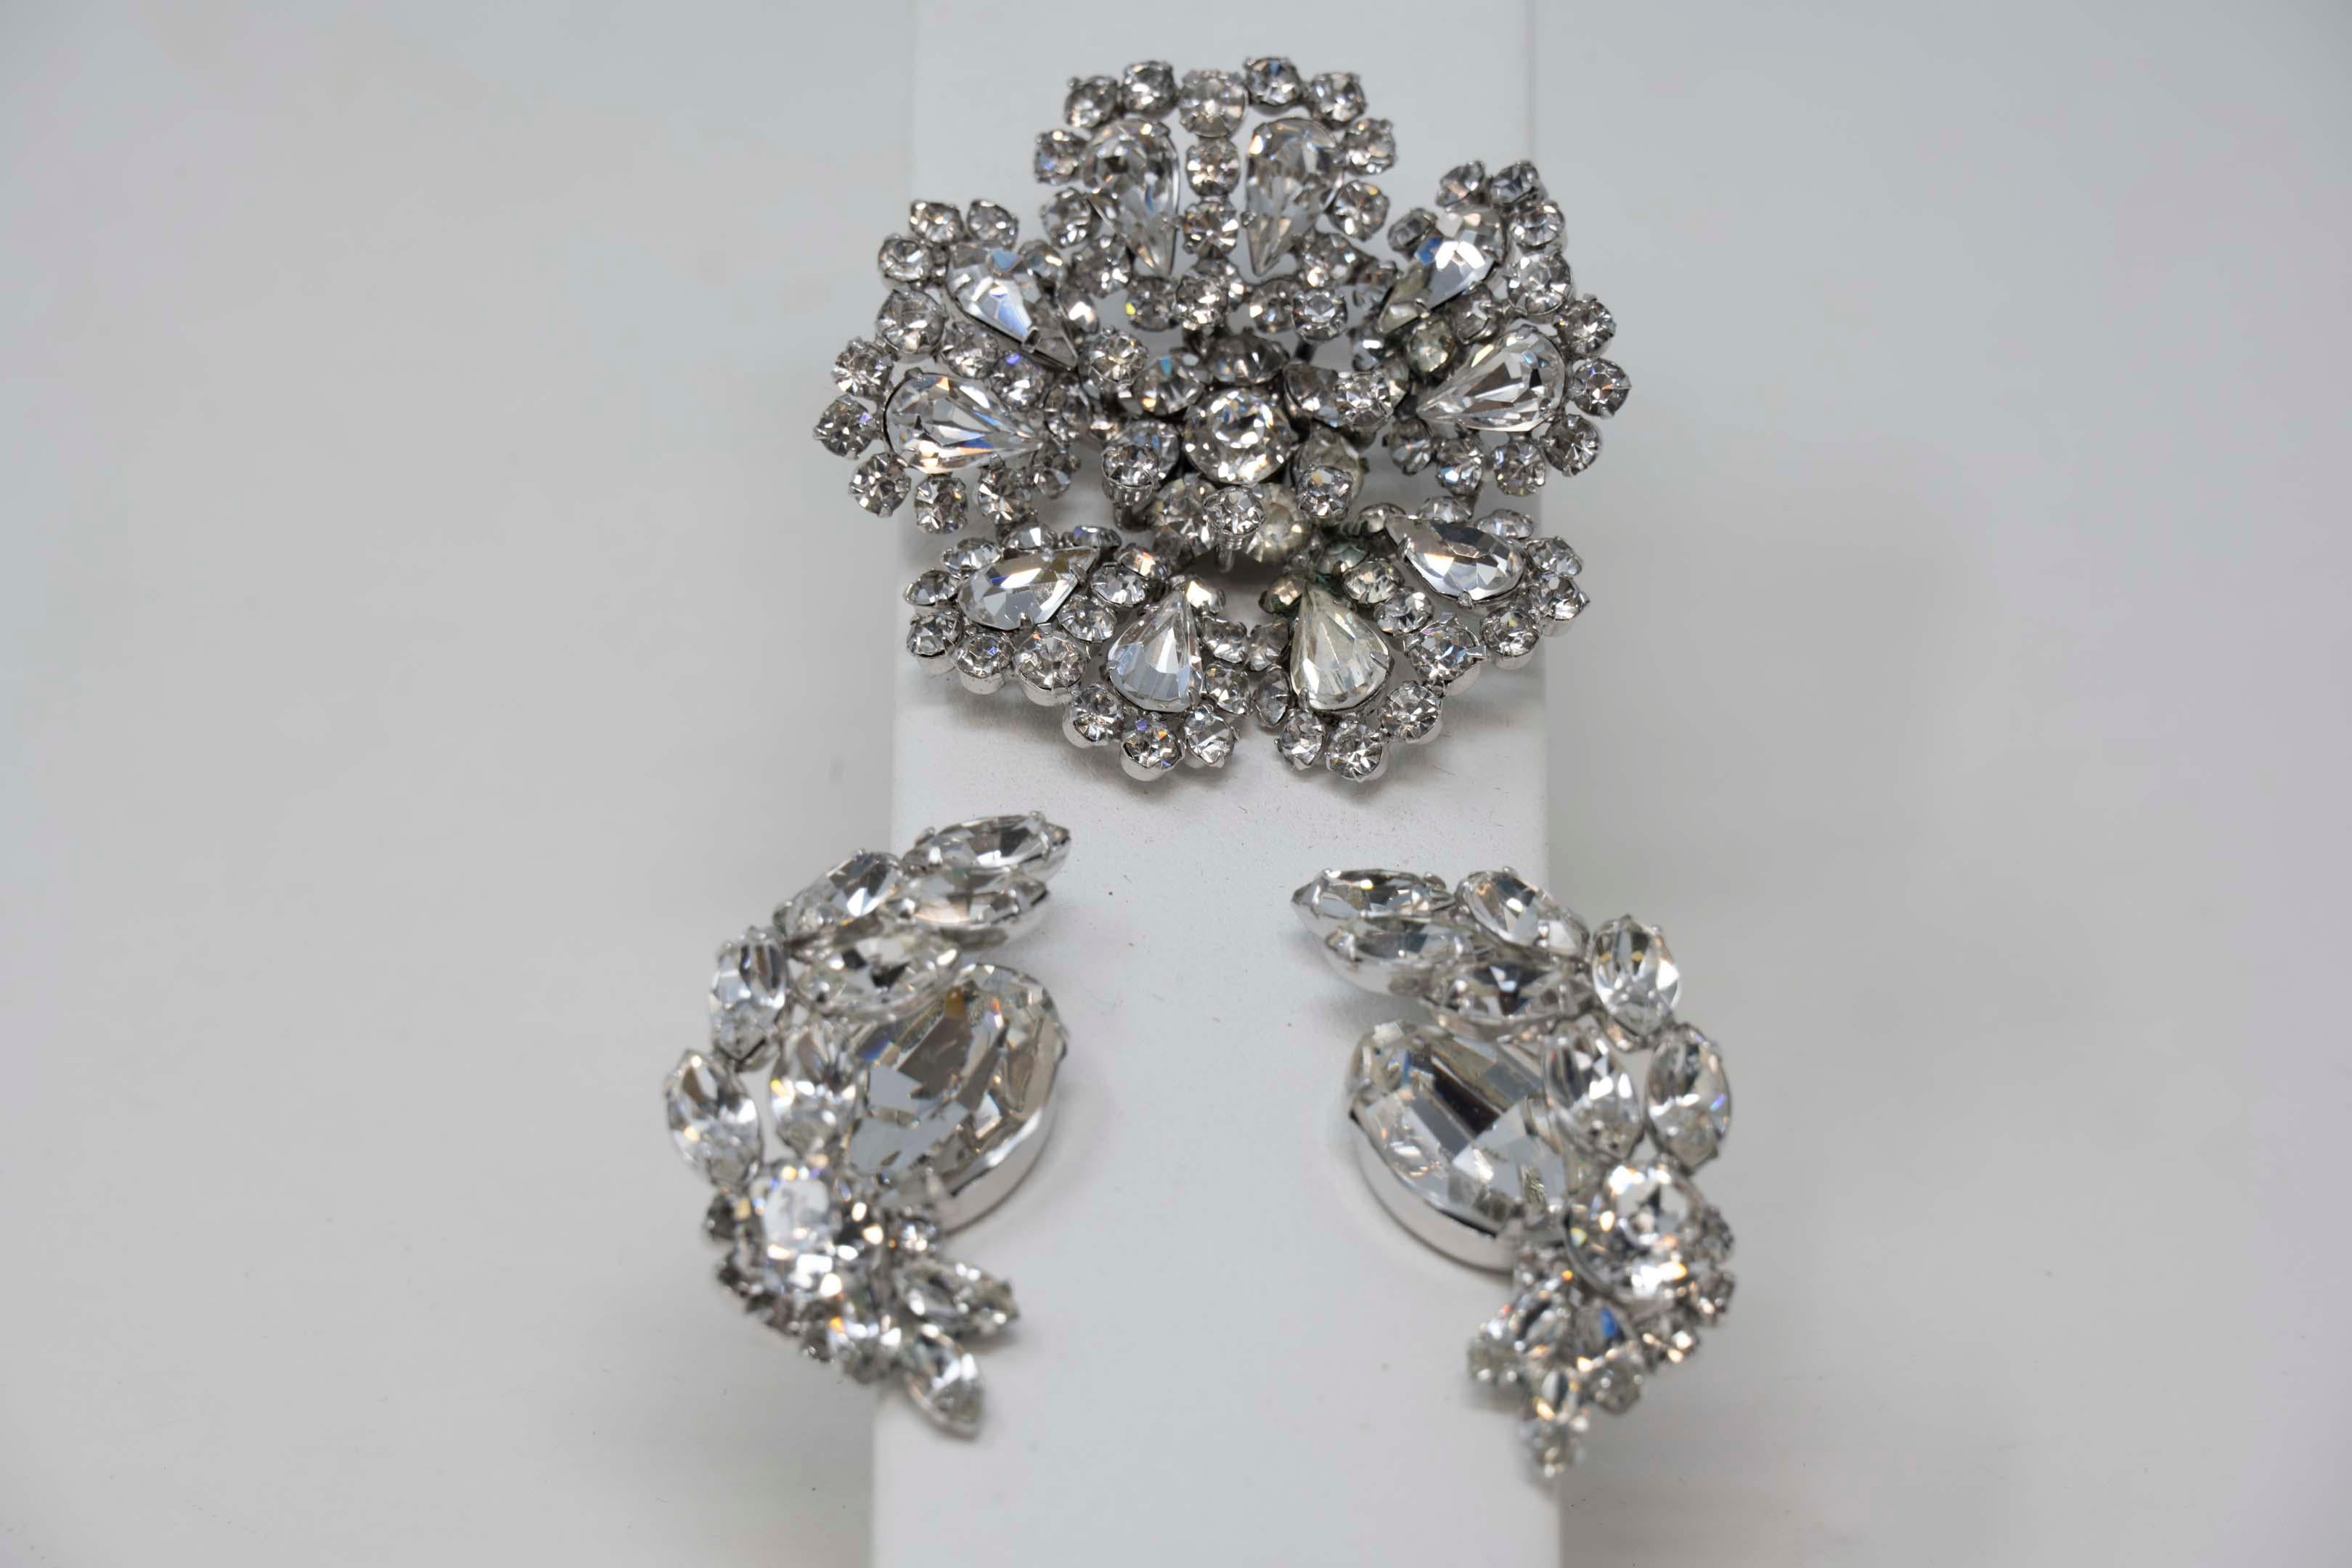 Signed demi parure clear rhinestone brooch matching earrings mid century, brooch 2 inches in diameter, earrings 1 /58 inches long. Crystal in good condition.
